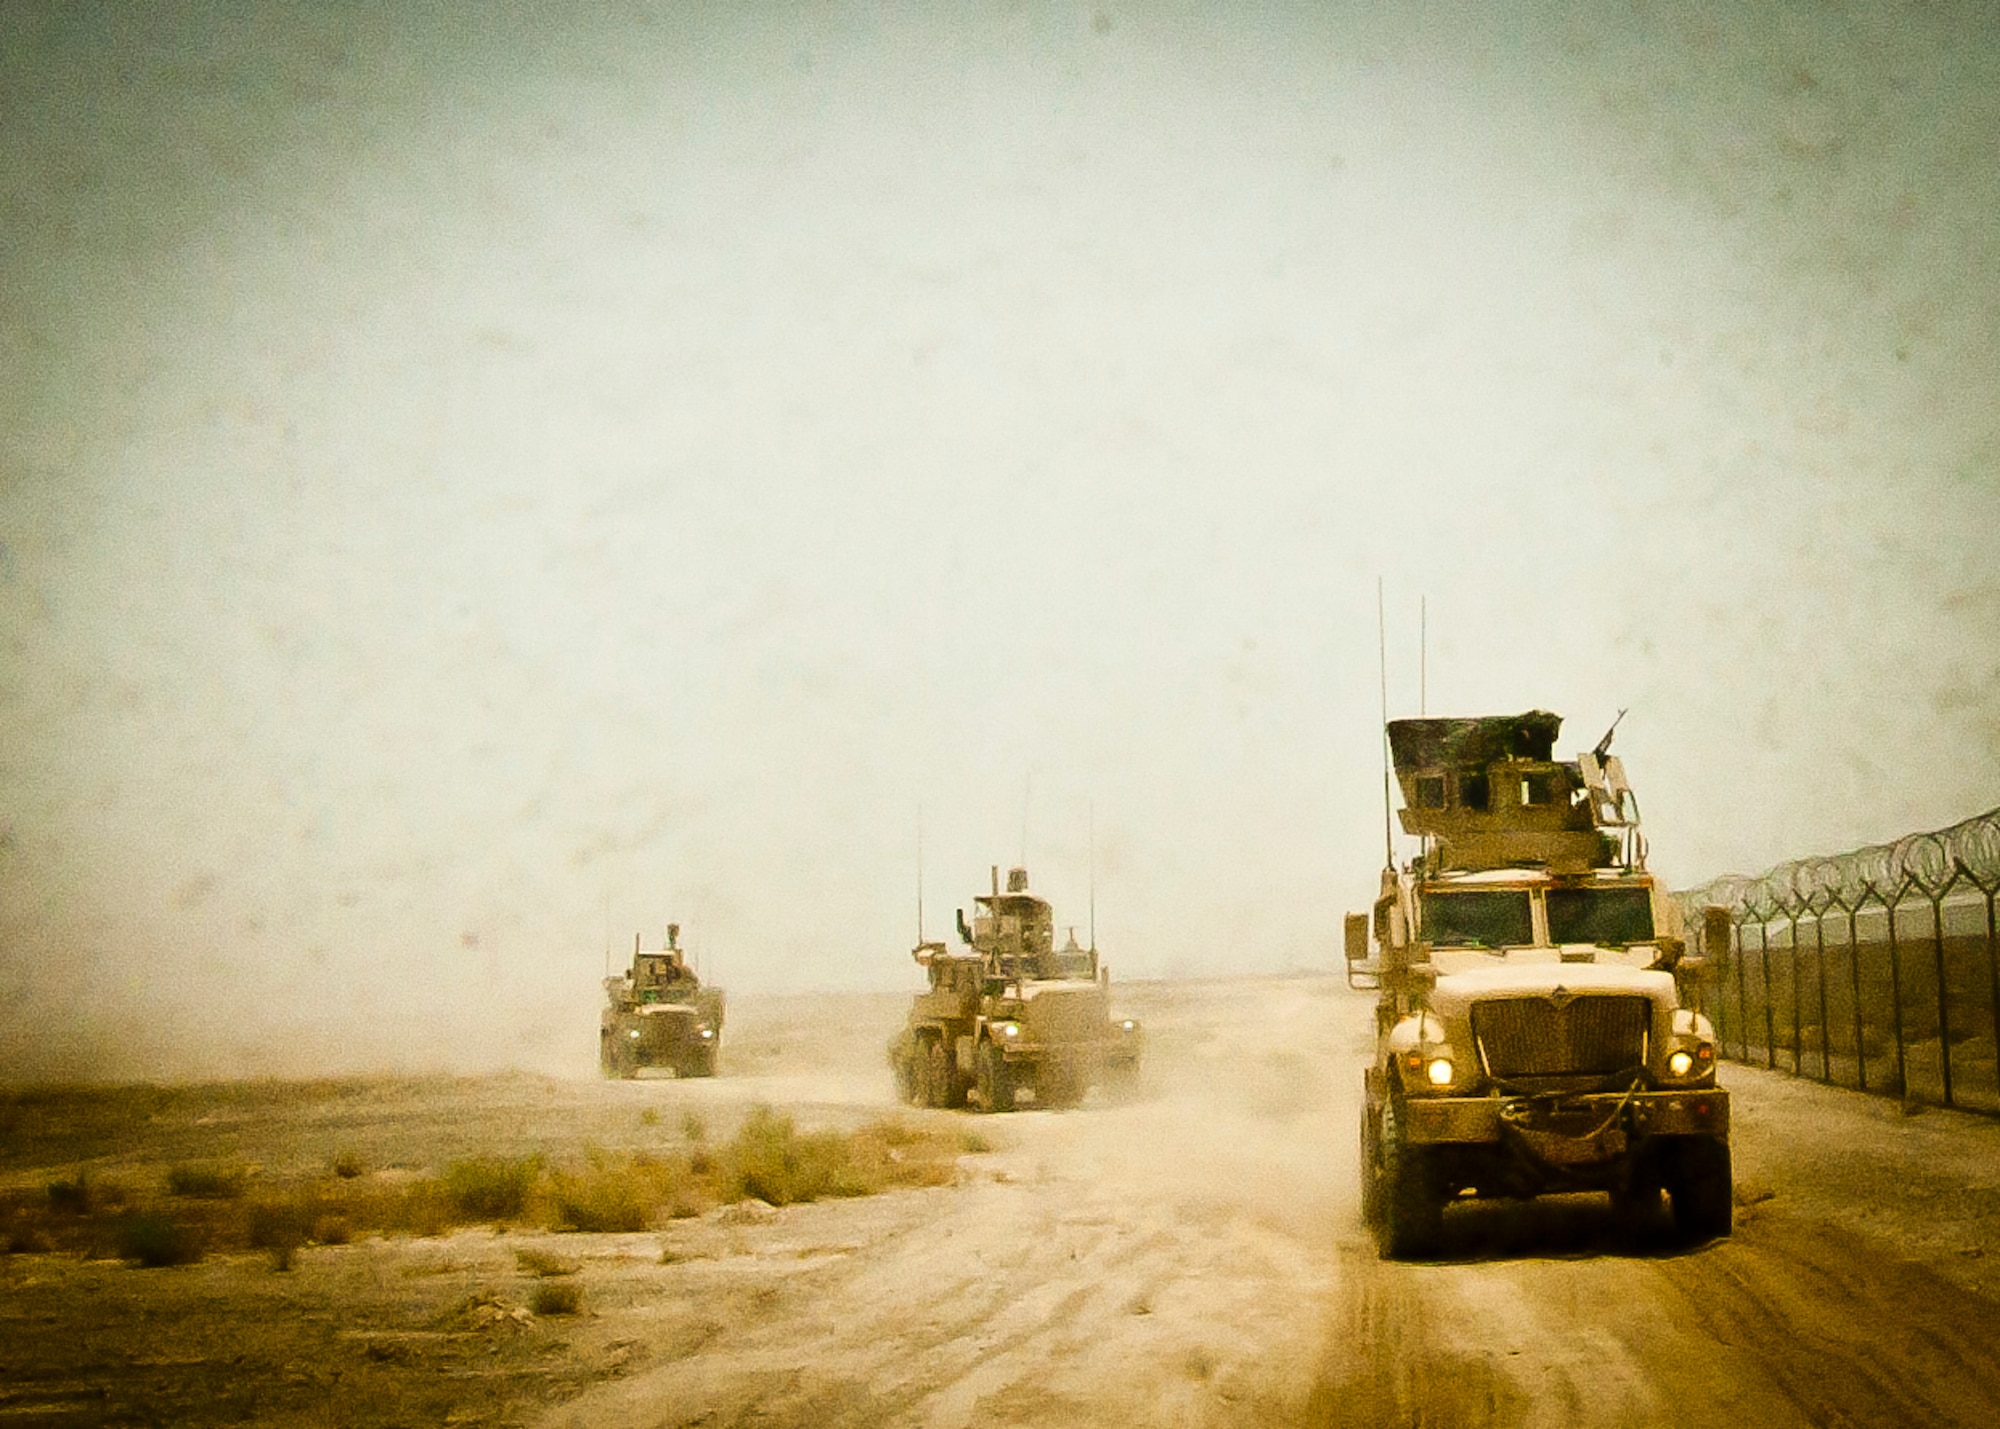 A joint-coalition convoy departs Kandahar Airfield, Afghanistan, to dispose of excess military ordnance June 12, 2013. Romanian soldiers provided security for the mission, while U.S. Air Force, U.S. Army, Slovakian and Australian explosive ordnance disposal personnel conducted the controlled detonations, which was an example of the working partnerships between the allied countries. (U.S. Air Force photo/Senior Airman Scott Saldukas)